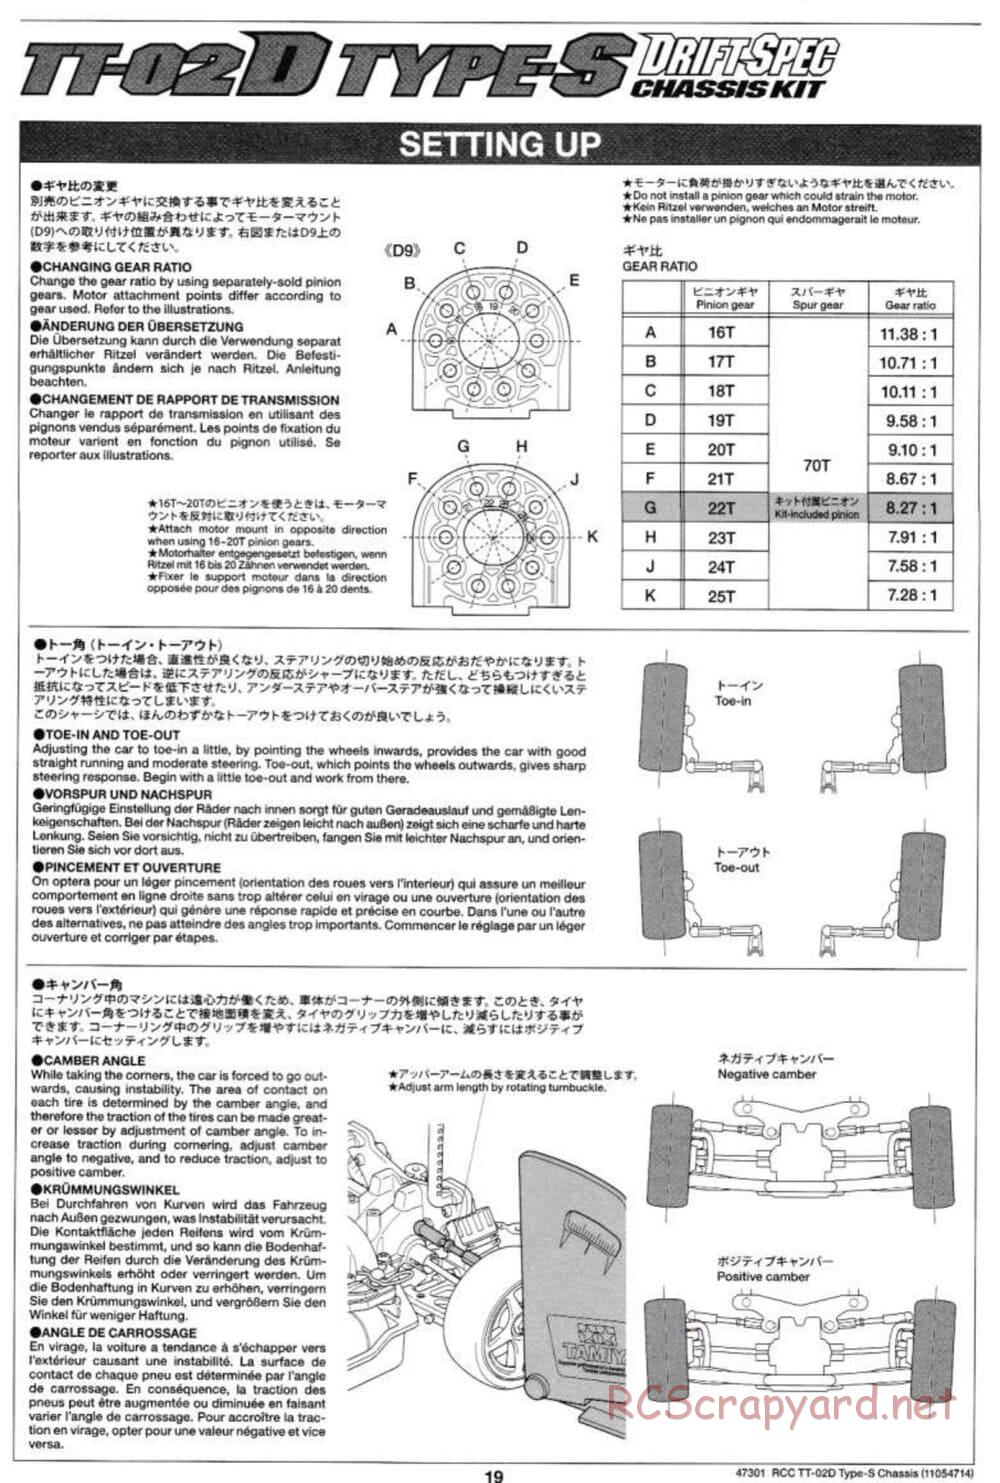 Tamiya - TT-02D Type-S Chassis - Manual - Page 19